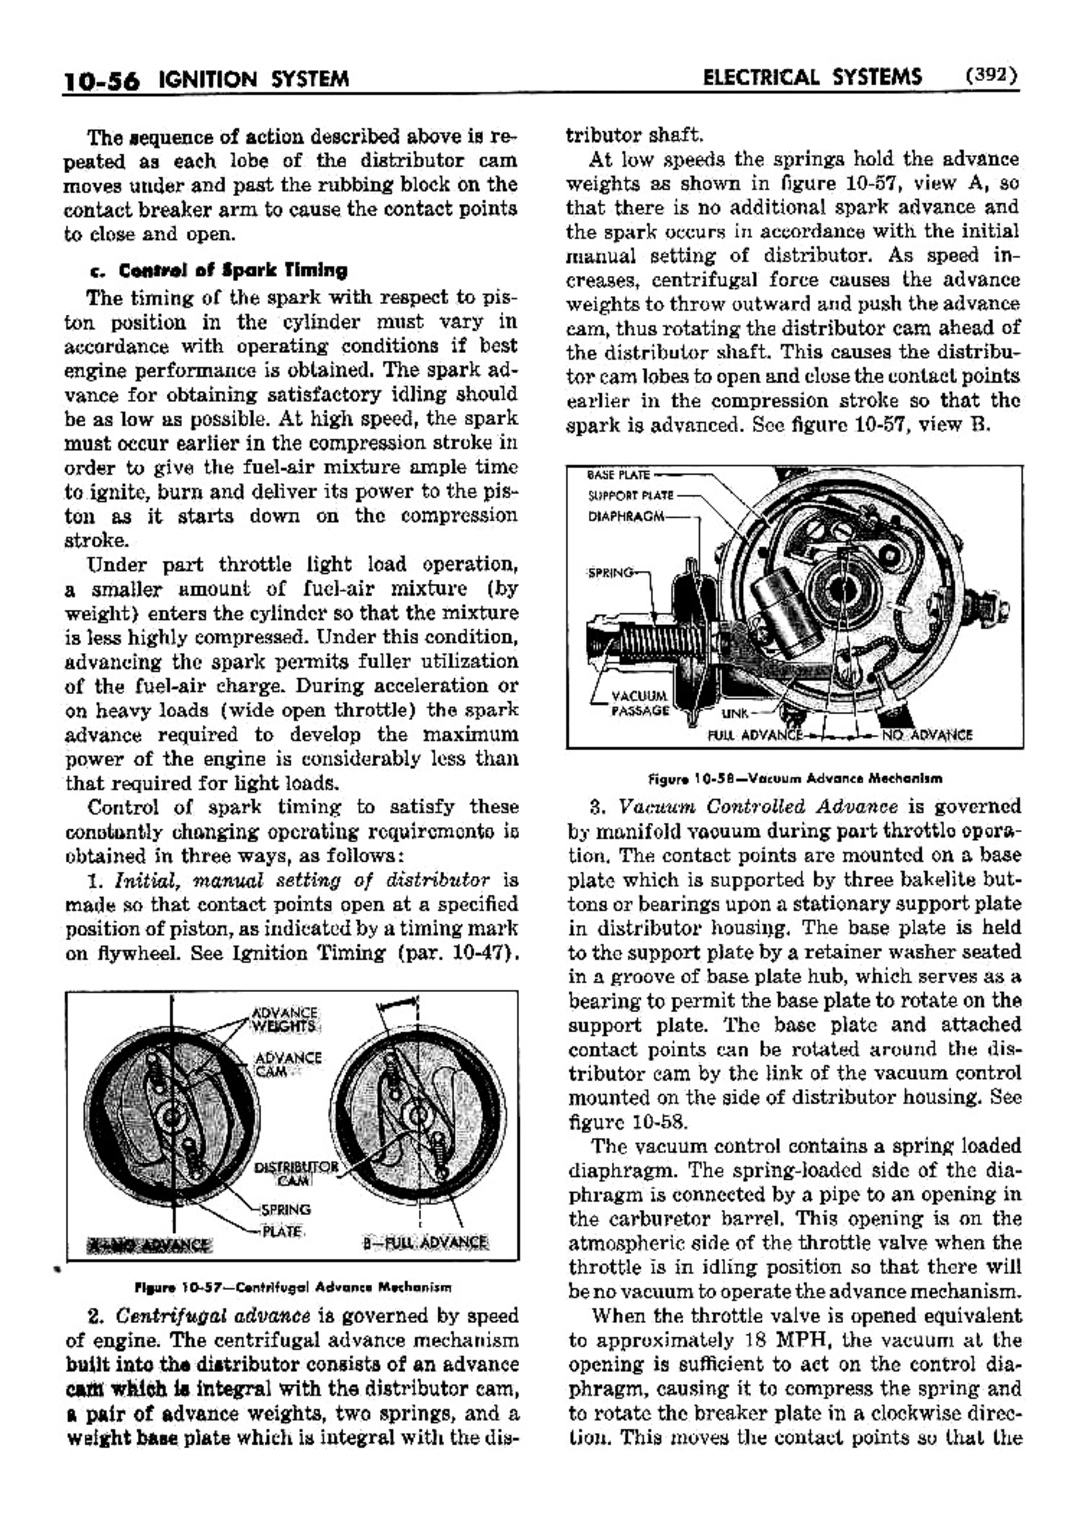 n_11 1952 Buick Shop Manual - Electrical Systems-056-056.jpg